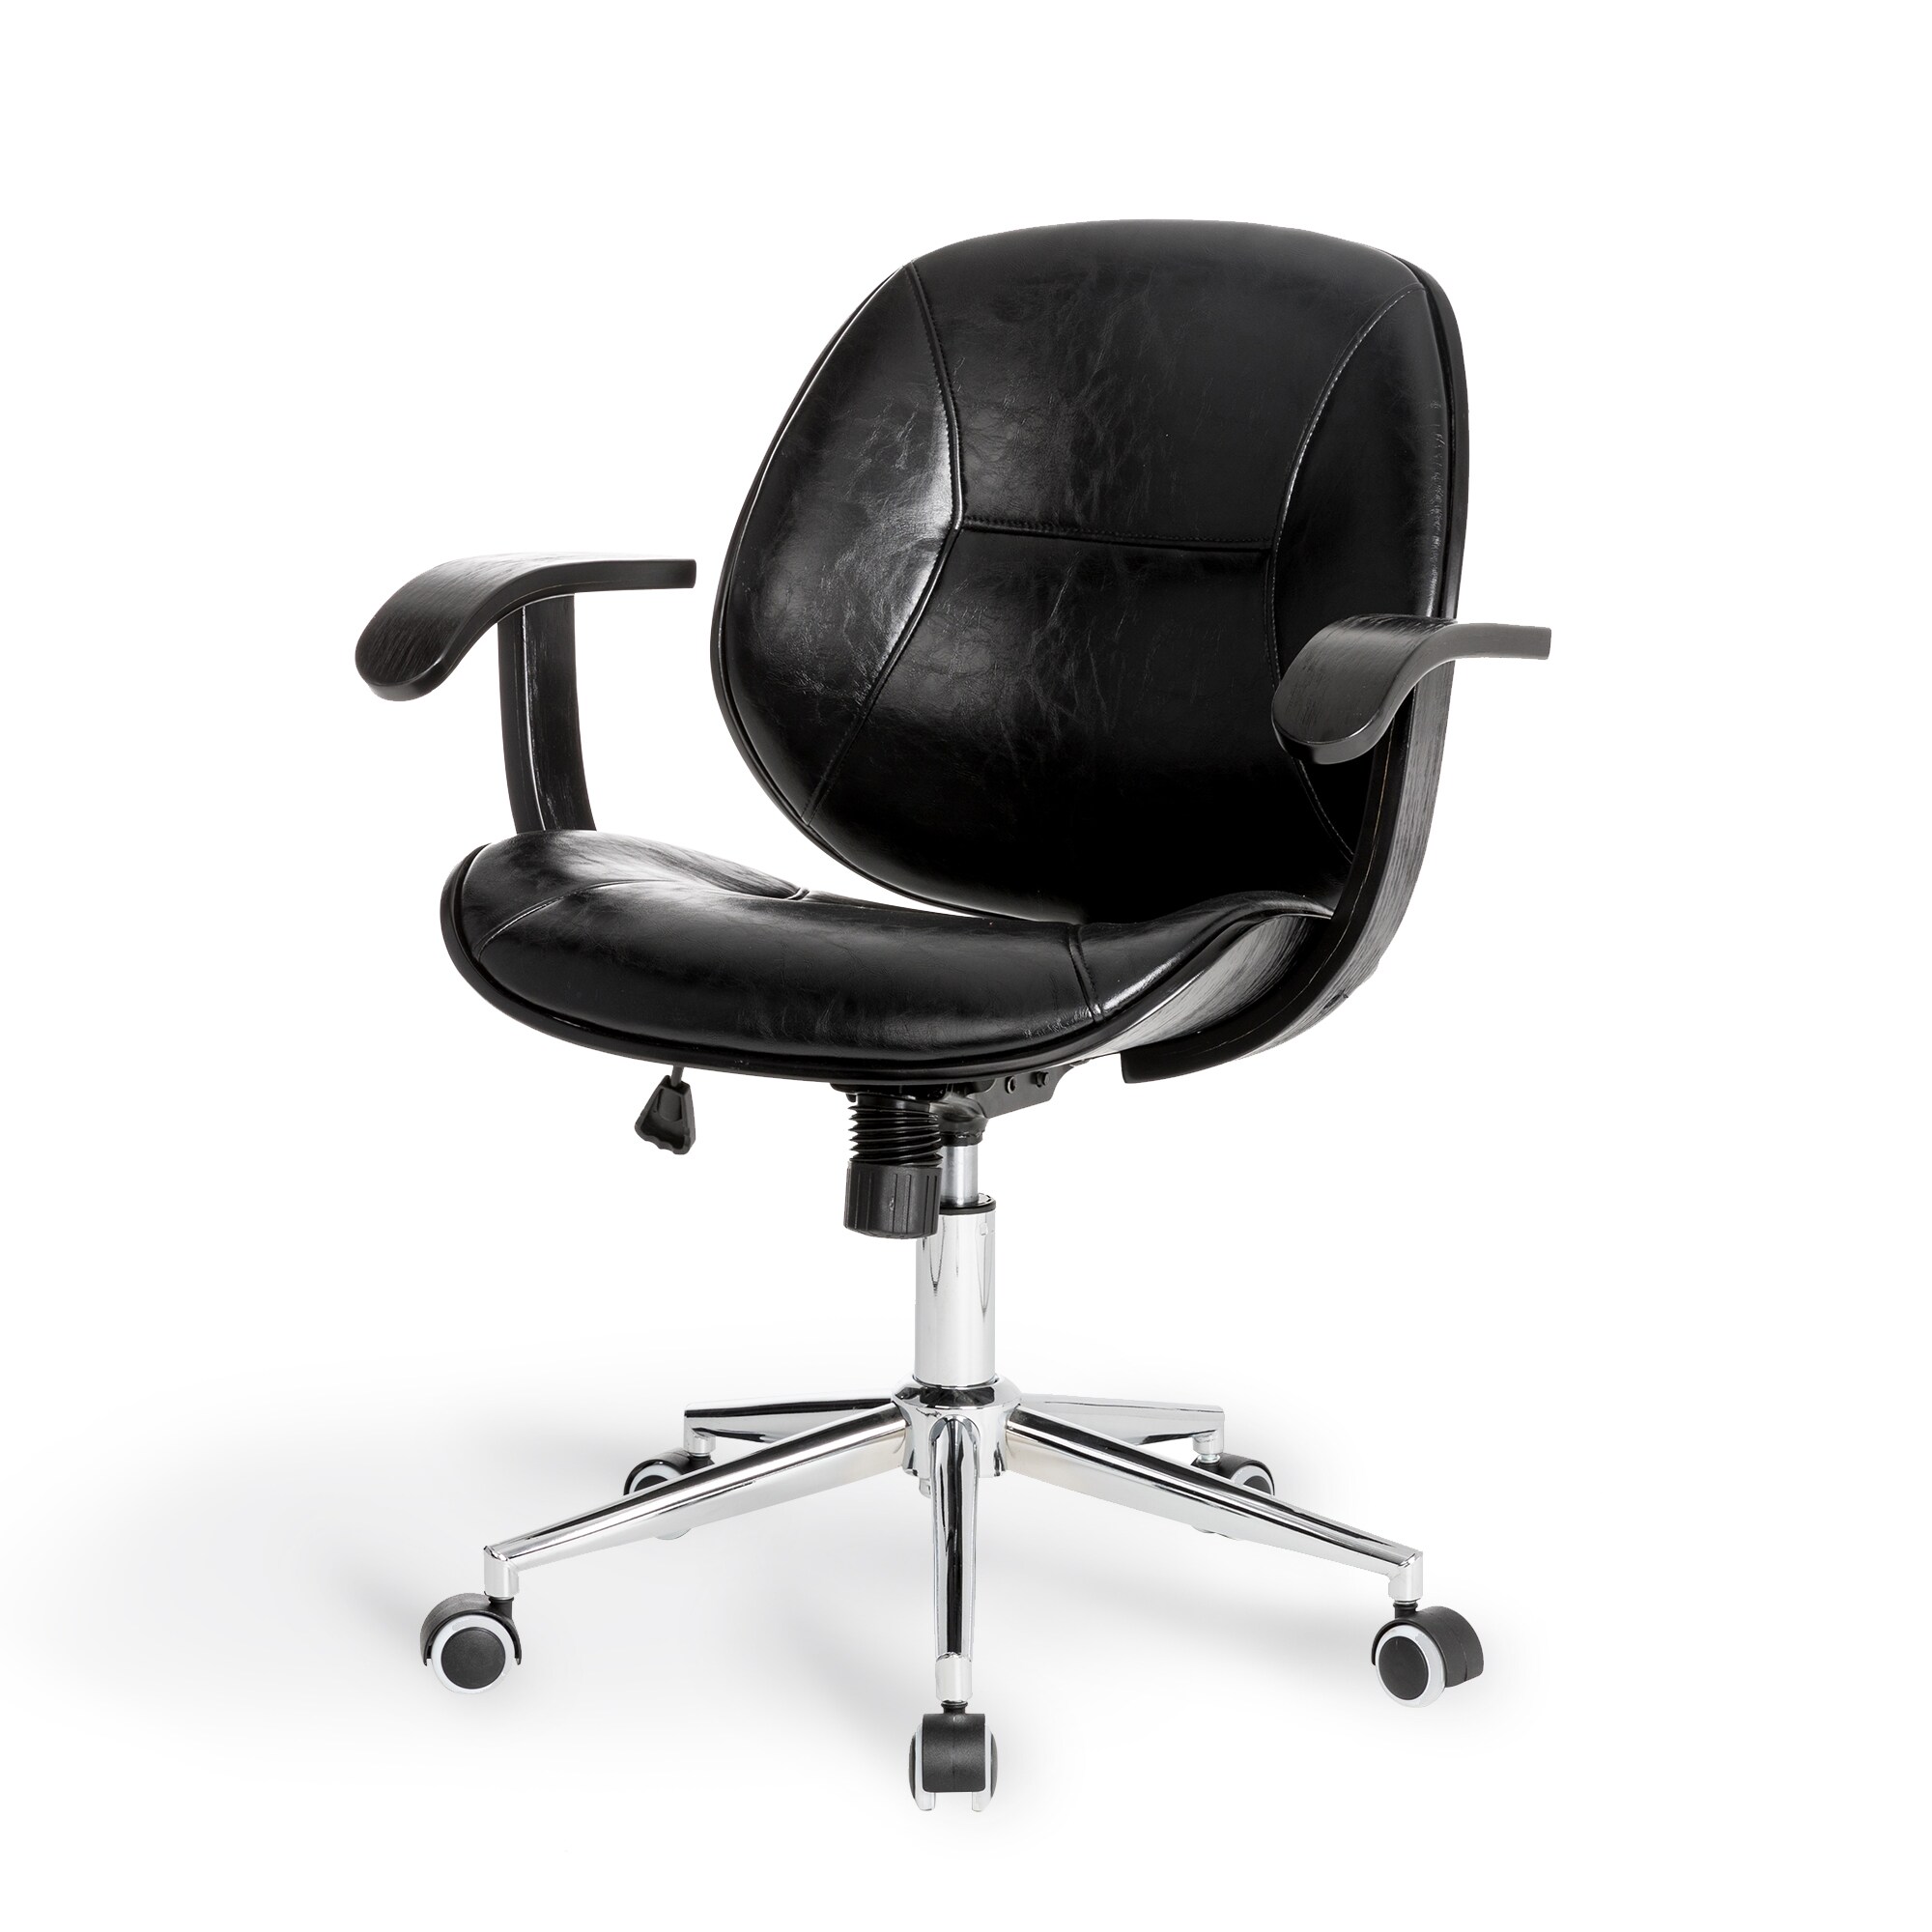 Glitzhome Leatherette Executive Office Chair with Pneumatic Lift, Cream, White